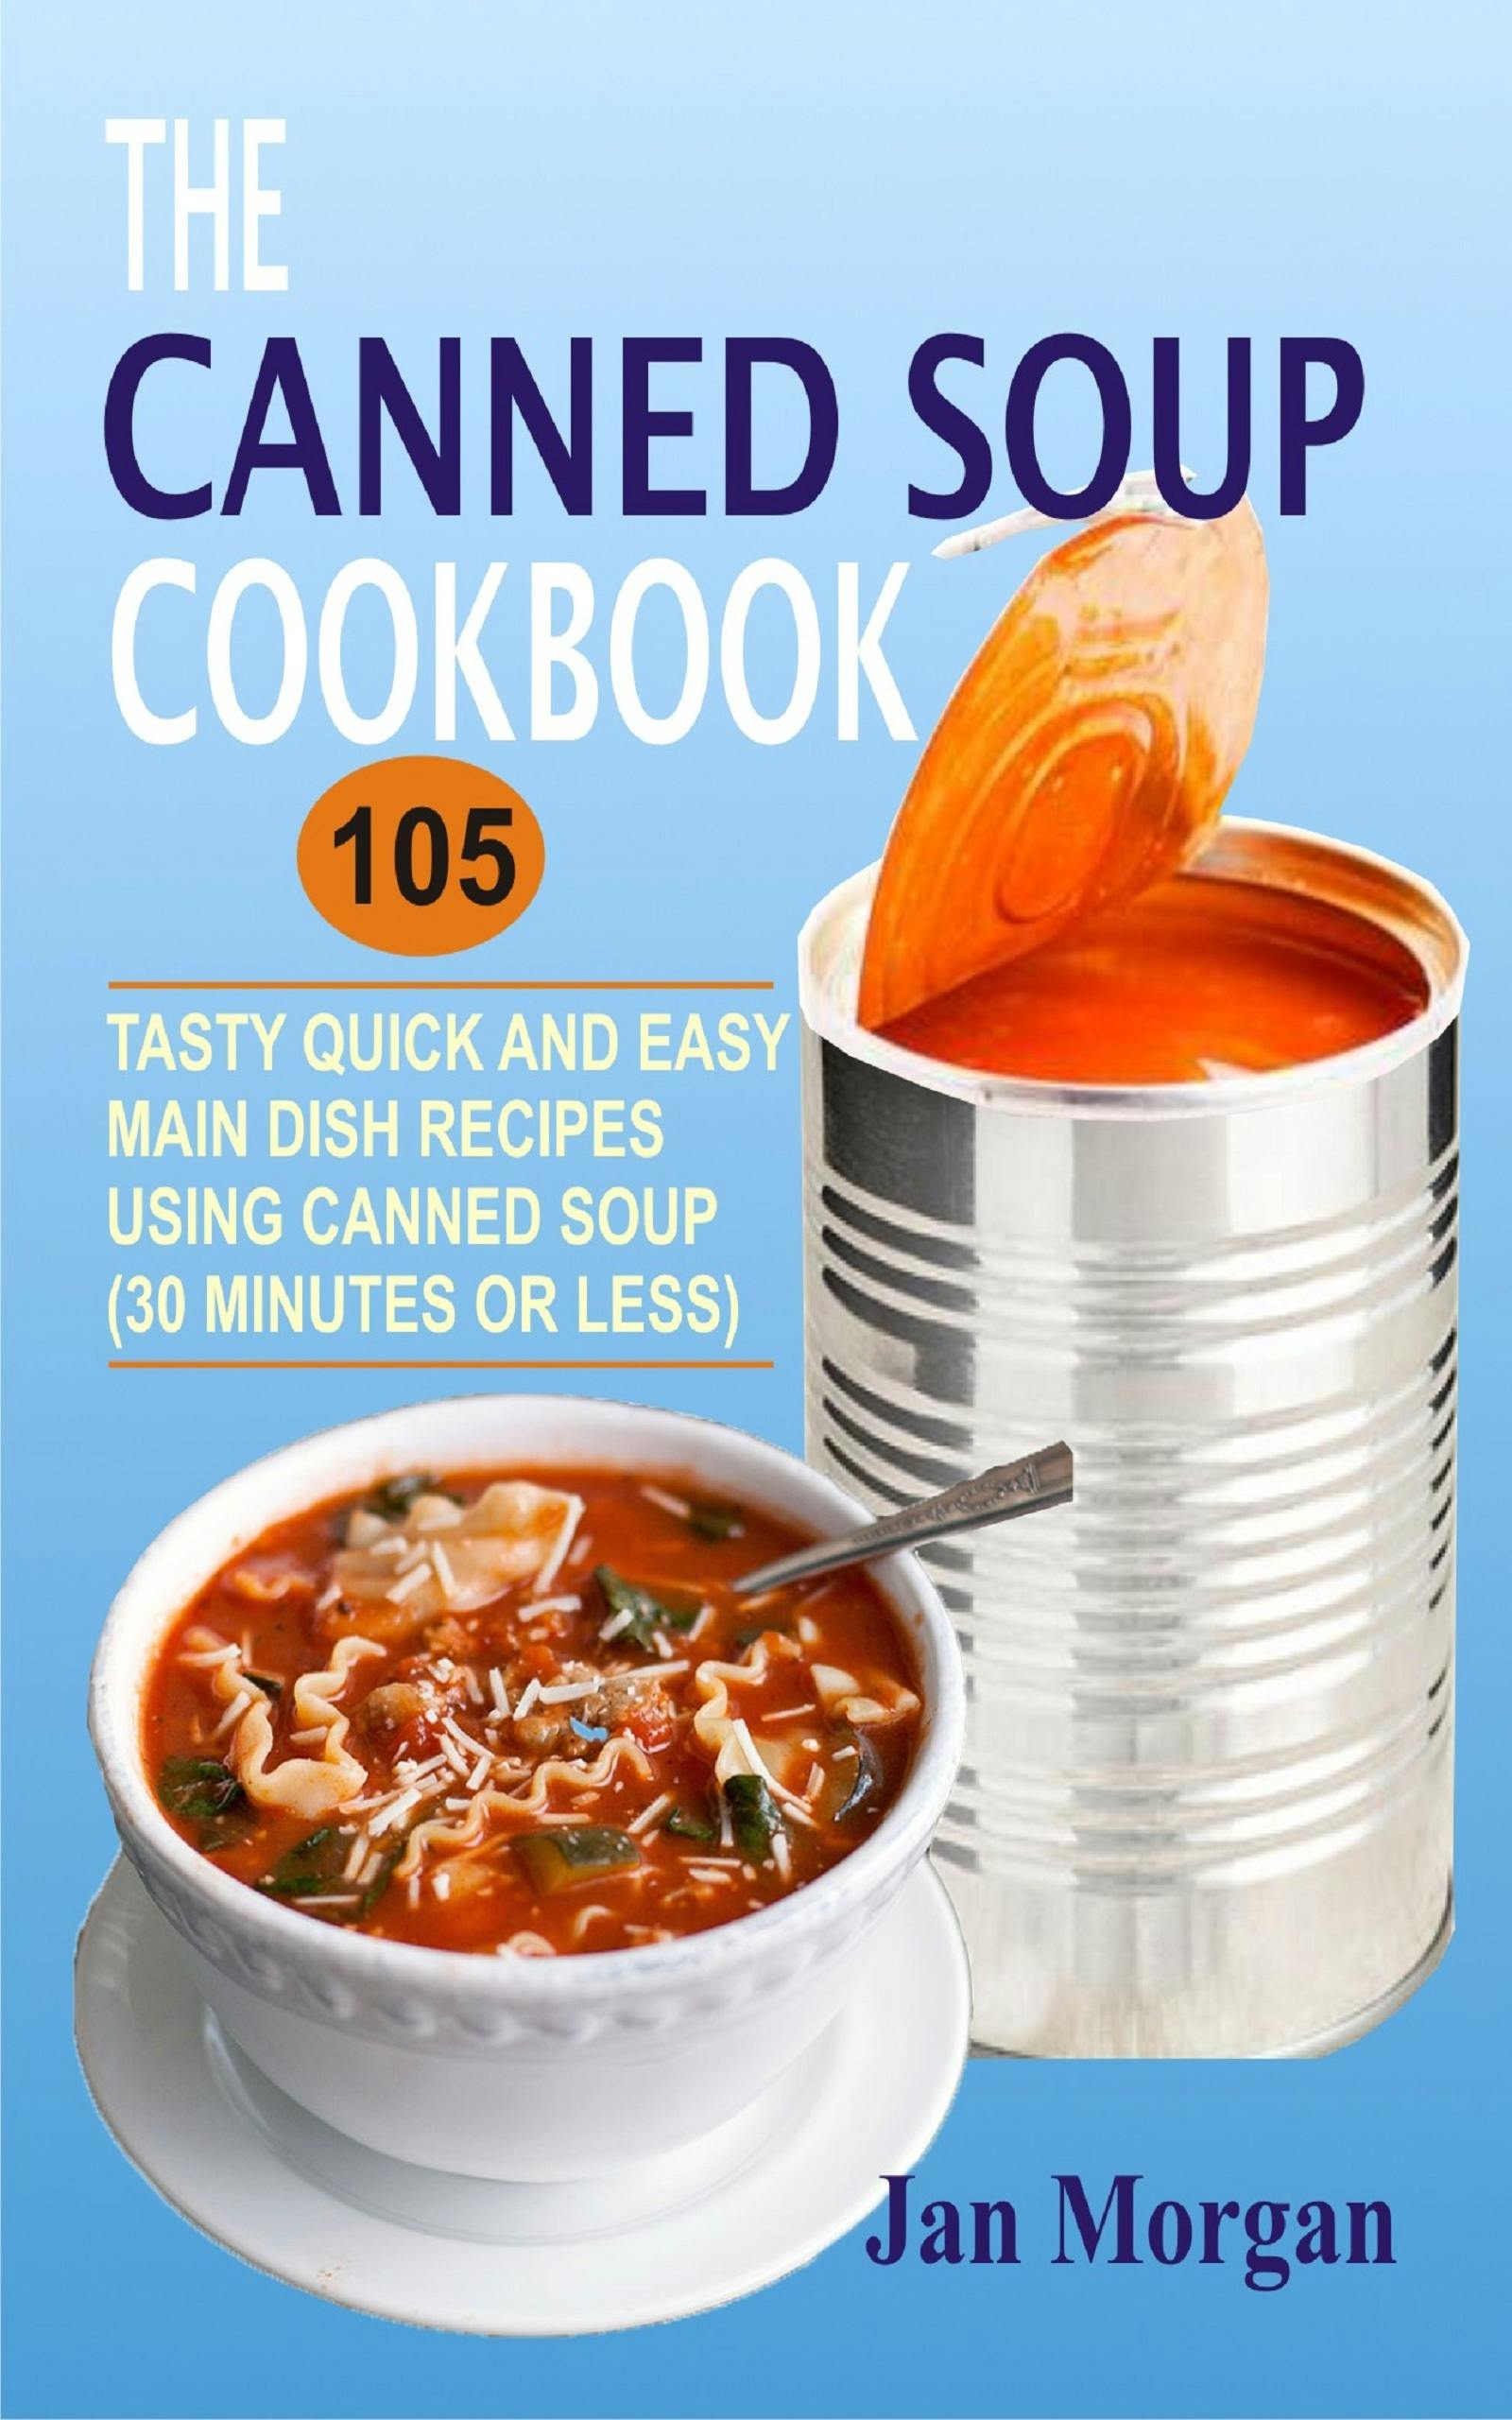 The Canned Soup Cookbook - Jan Morgan